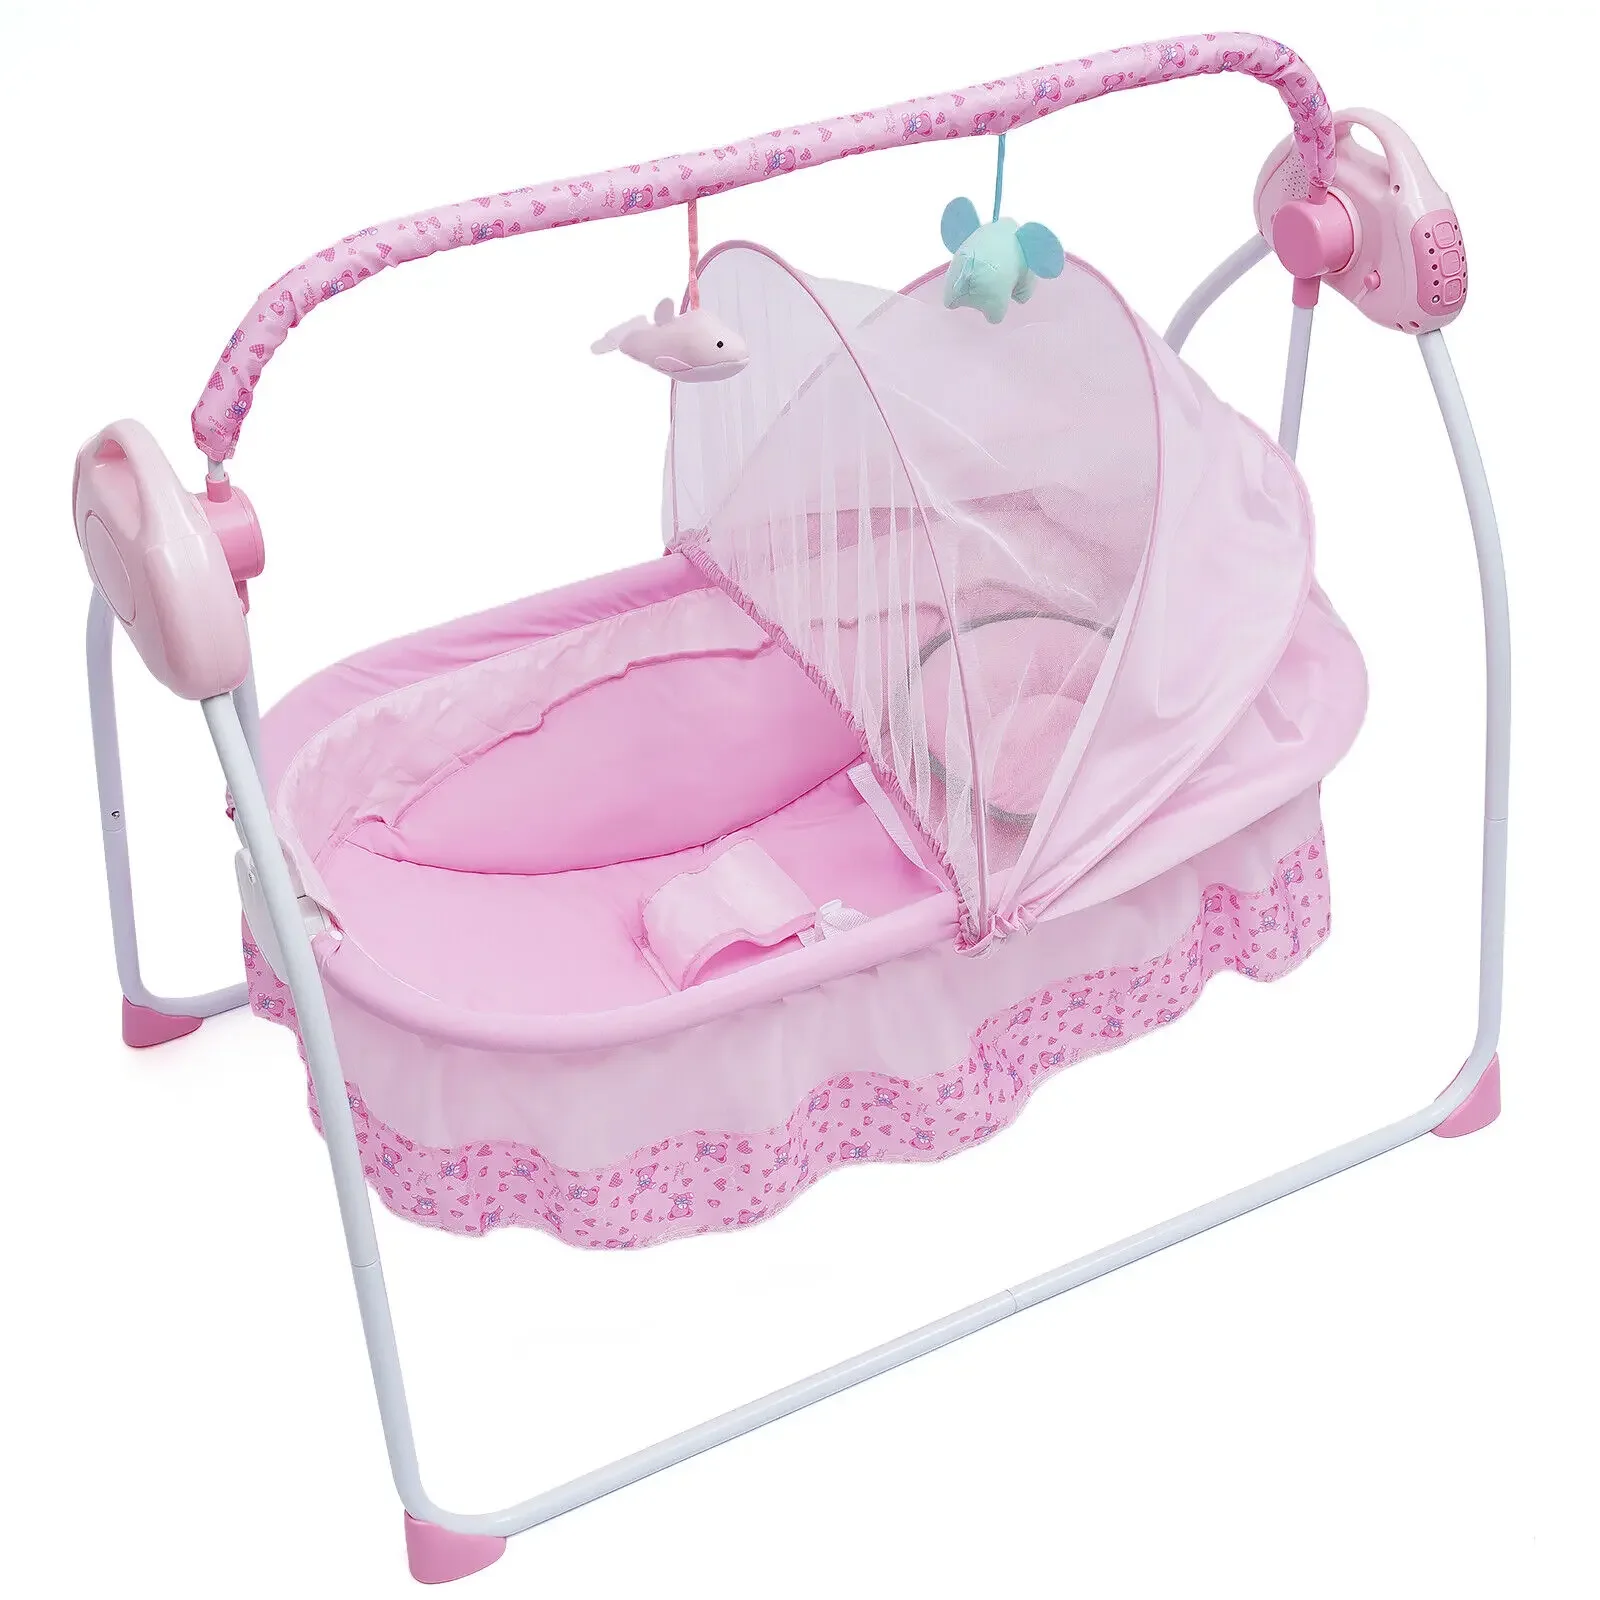 

Electric Baby Crib Cradle Infant Bed Sleeping Auto-Swing Rocking Chair Bassinet For Babies 0-18 Months Pink